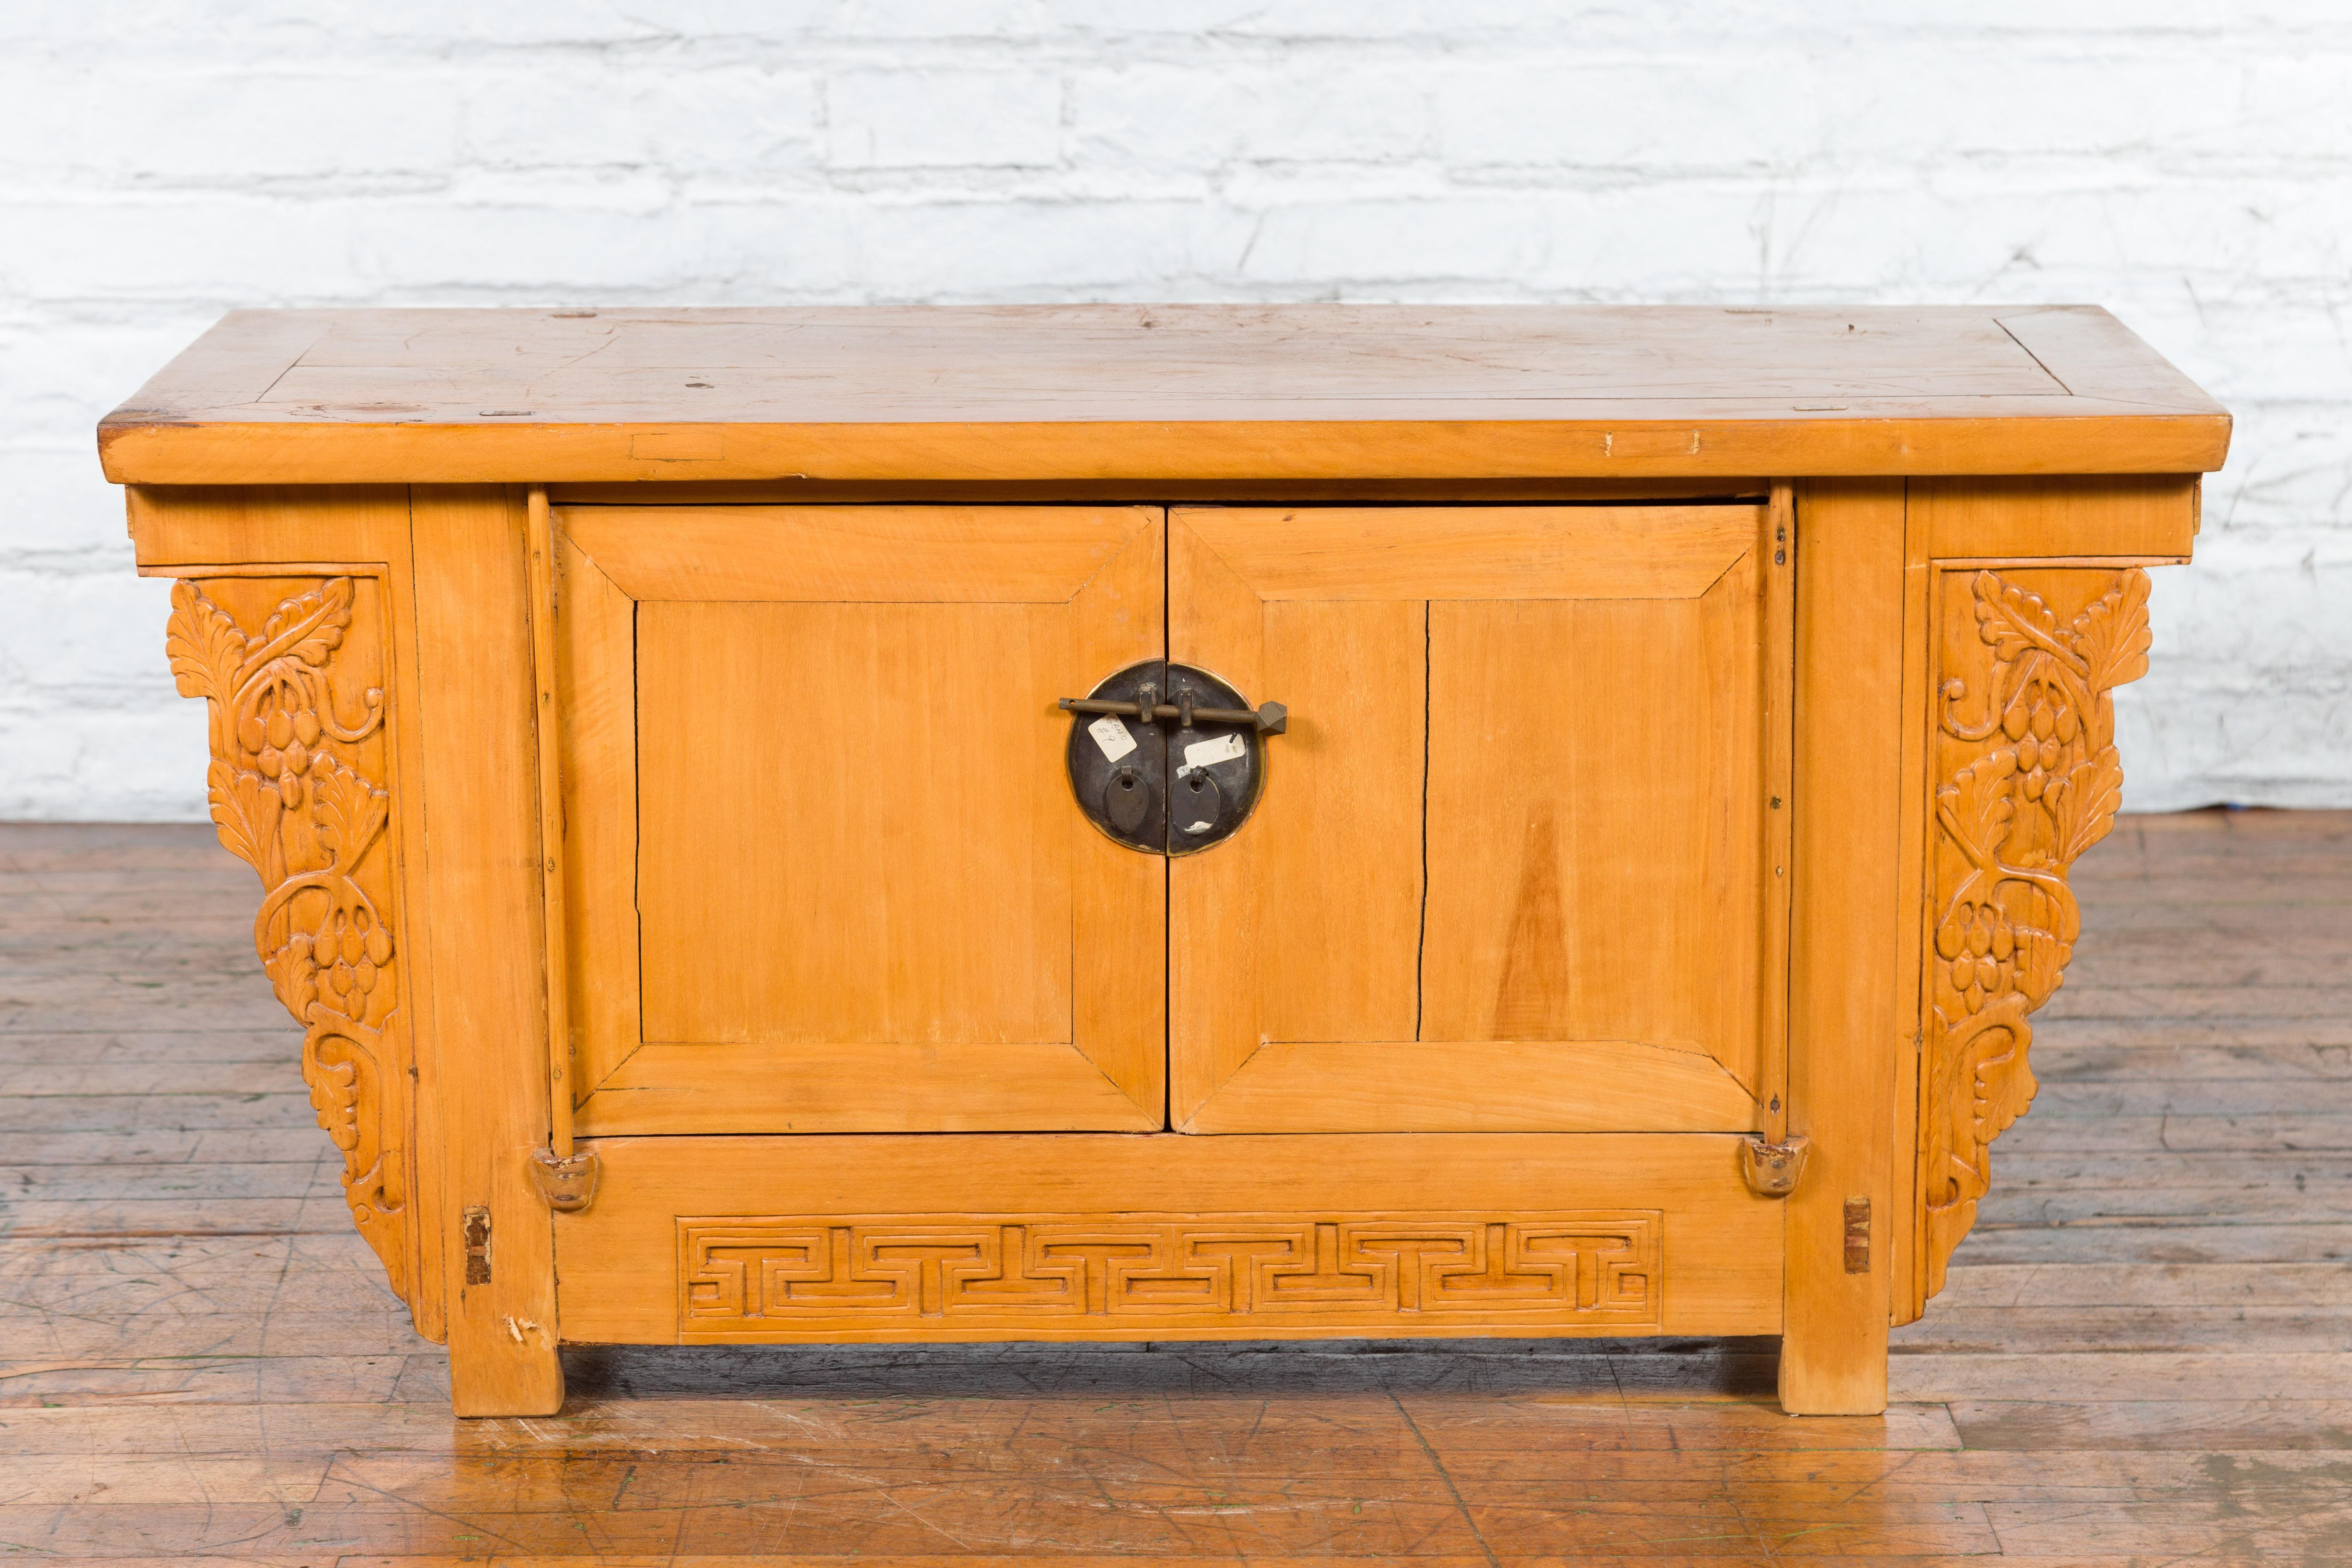 A Chinese Qing Dynasty period elm wood butterfly sideboard from the 19th century, with carved grapevines and meander motifs, natural finish and bronze hardware. Created in China during the Qing Dynasty in the 19th century, this elm wood sideboard